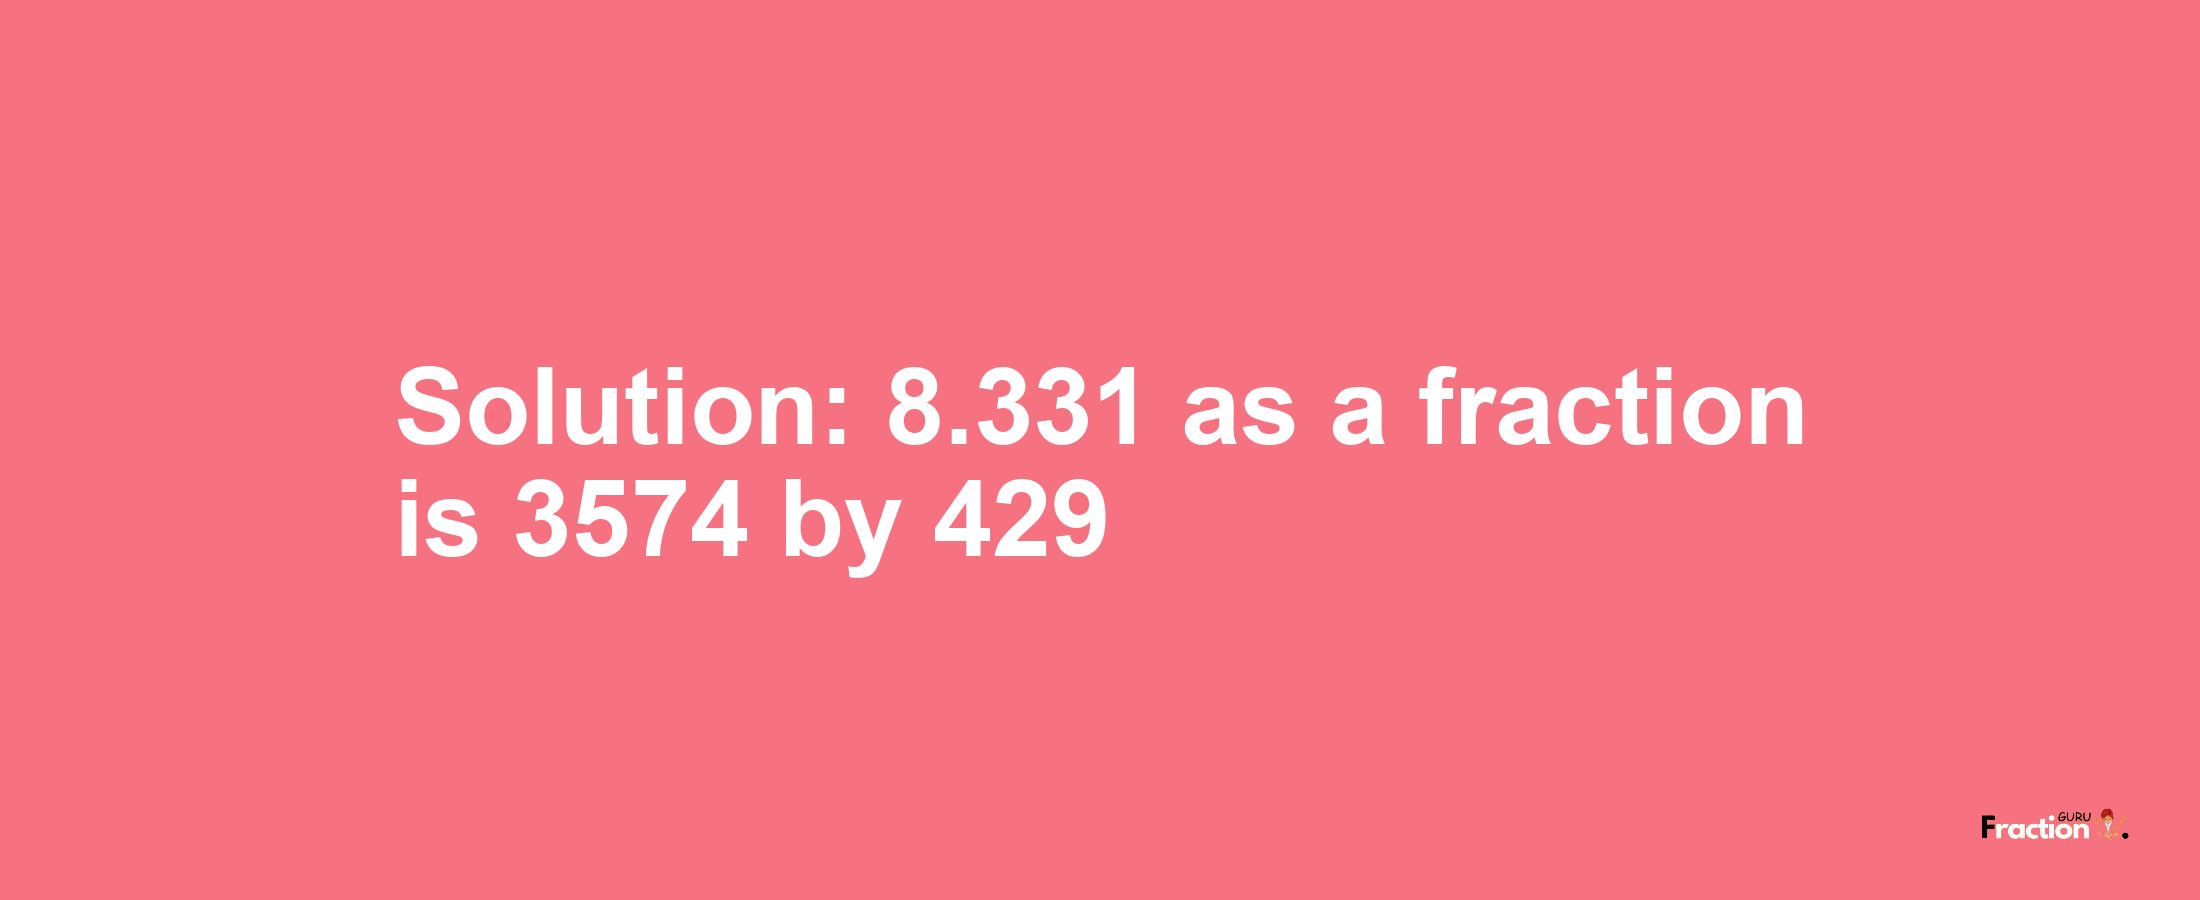 Solution:8.331 as a fraction is 3574/429